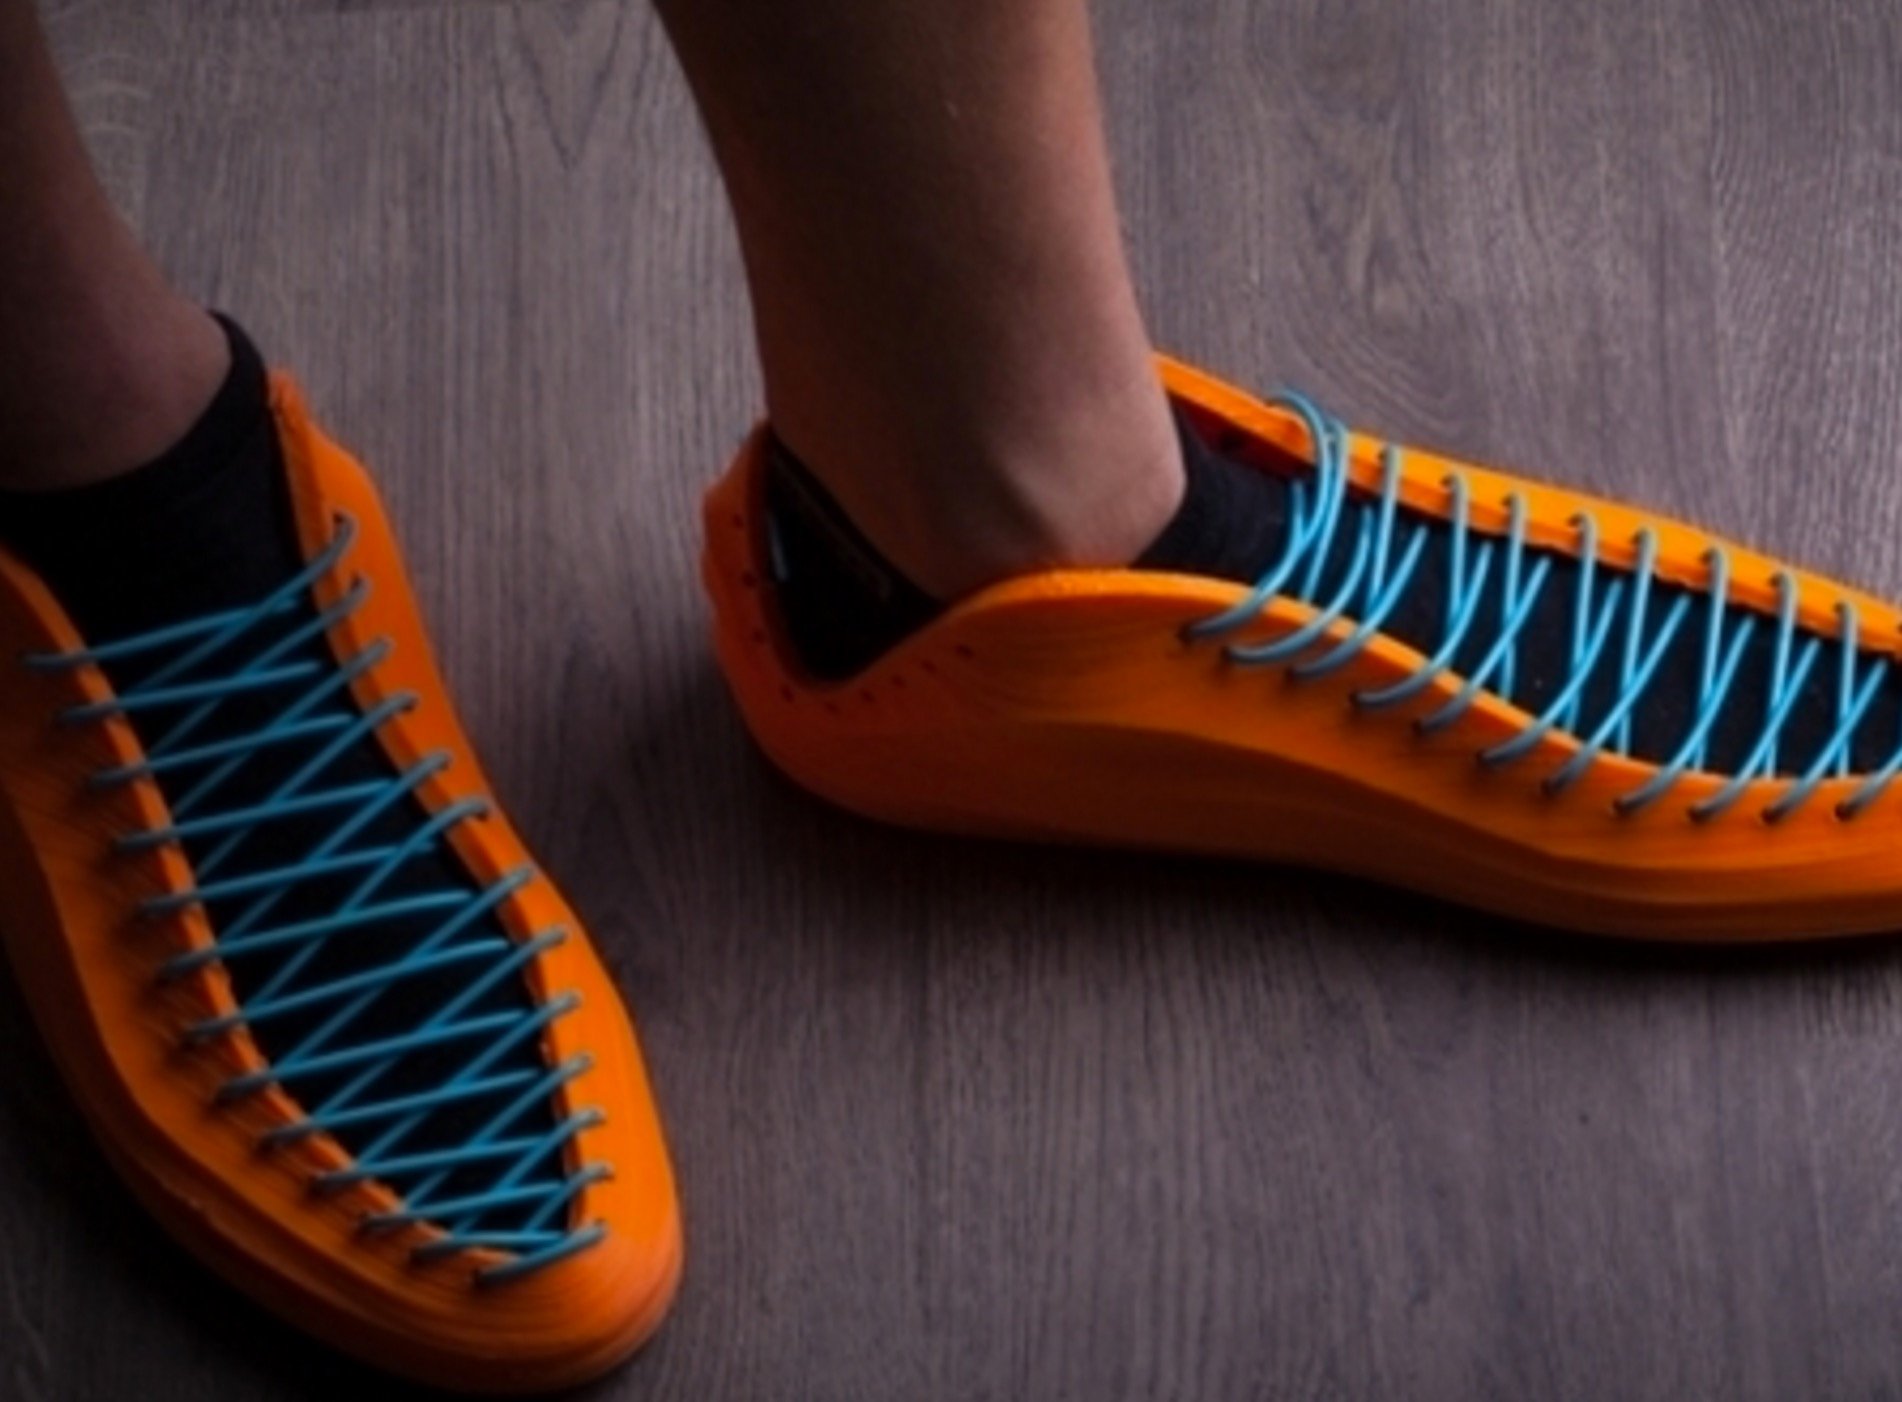  Wearing 3D printed shoes after lacing them up 